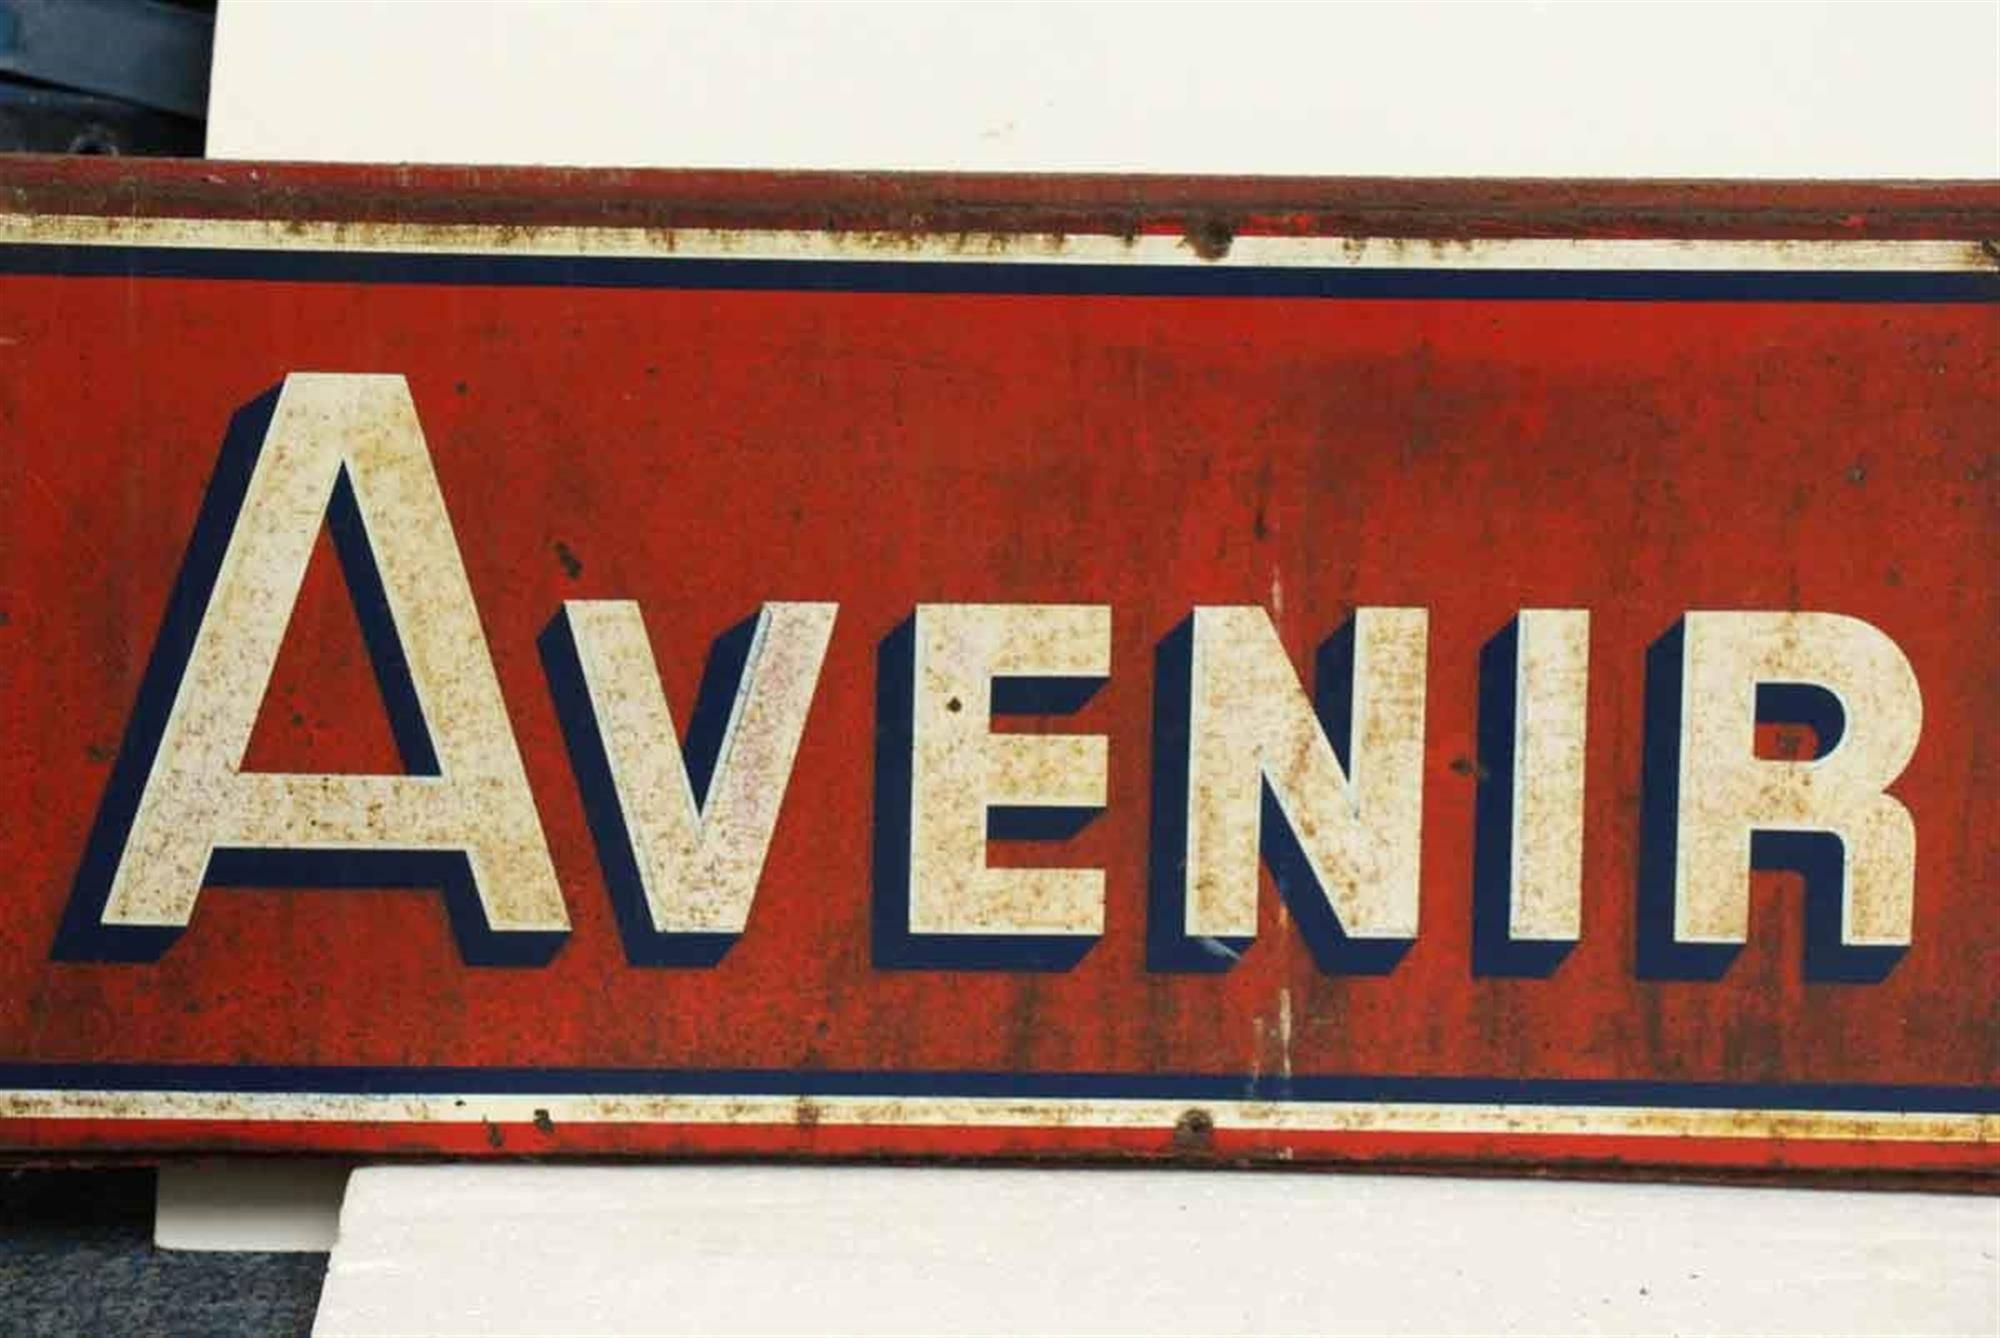 1960s French wood and metal sign reading 'Avenir Publicite'. This sign has a red background with white lettering. The English translation is 'Future Advertising'. This can be seen at our 149 Madison Ave location in Manhattan.